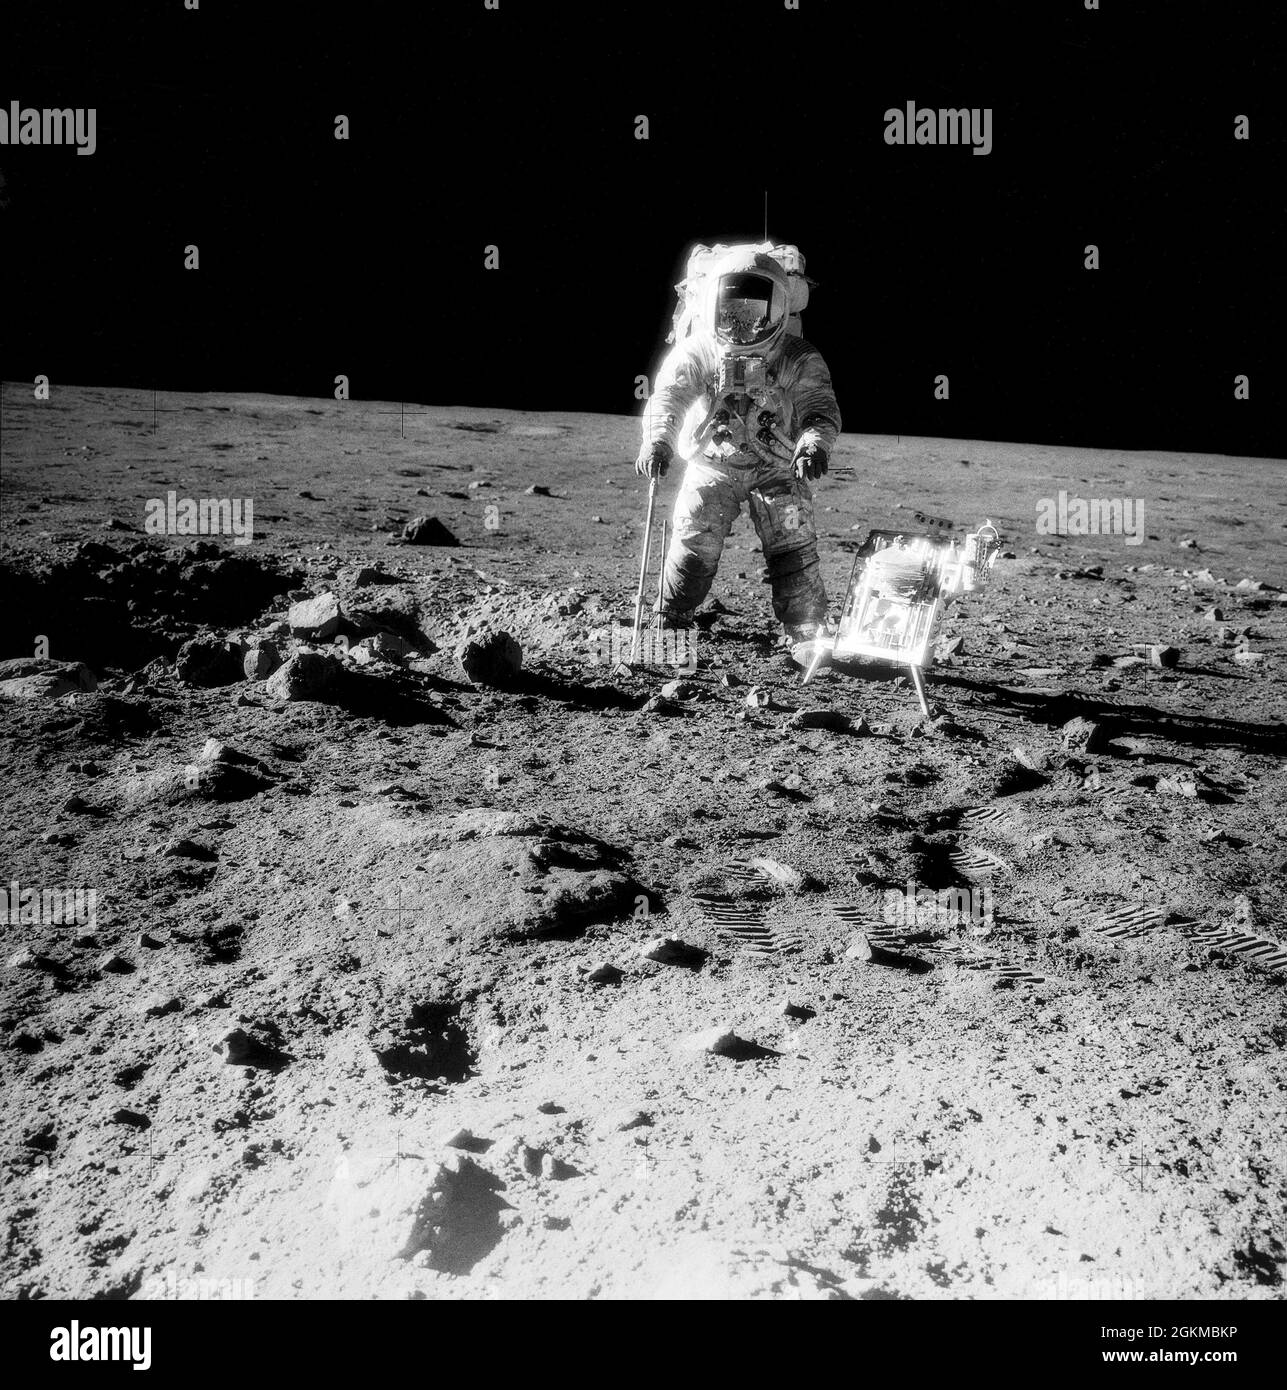 (19-20 Nov. 1969) --- One of the Apollo 12 crew members is photographed with the tools and carrier of the Apollo Lunar Hand Tools (ALHT) during extravehicular activity (EVA) on the surface of the moon. Several footprints made by the two crew members during their EVA are seen in the foreground. While astronauts Charles Conrad Jr., commander, and Alan L. Bean, lunar module pilot, descended in the Lunar Module (LM) 'Intrepid' to explore the Ocean of Storms region of the moon, astronaut Richard F. Gordon Jr., command module pilot, remained with the Command and Service Modules (CSM) 'Yankee Clipper Stock Photo